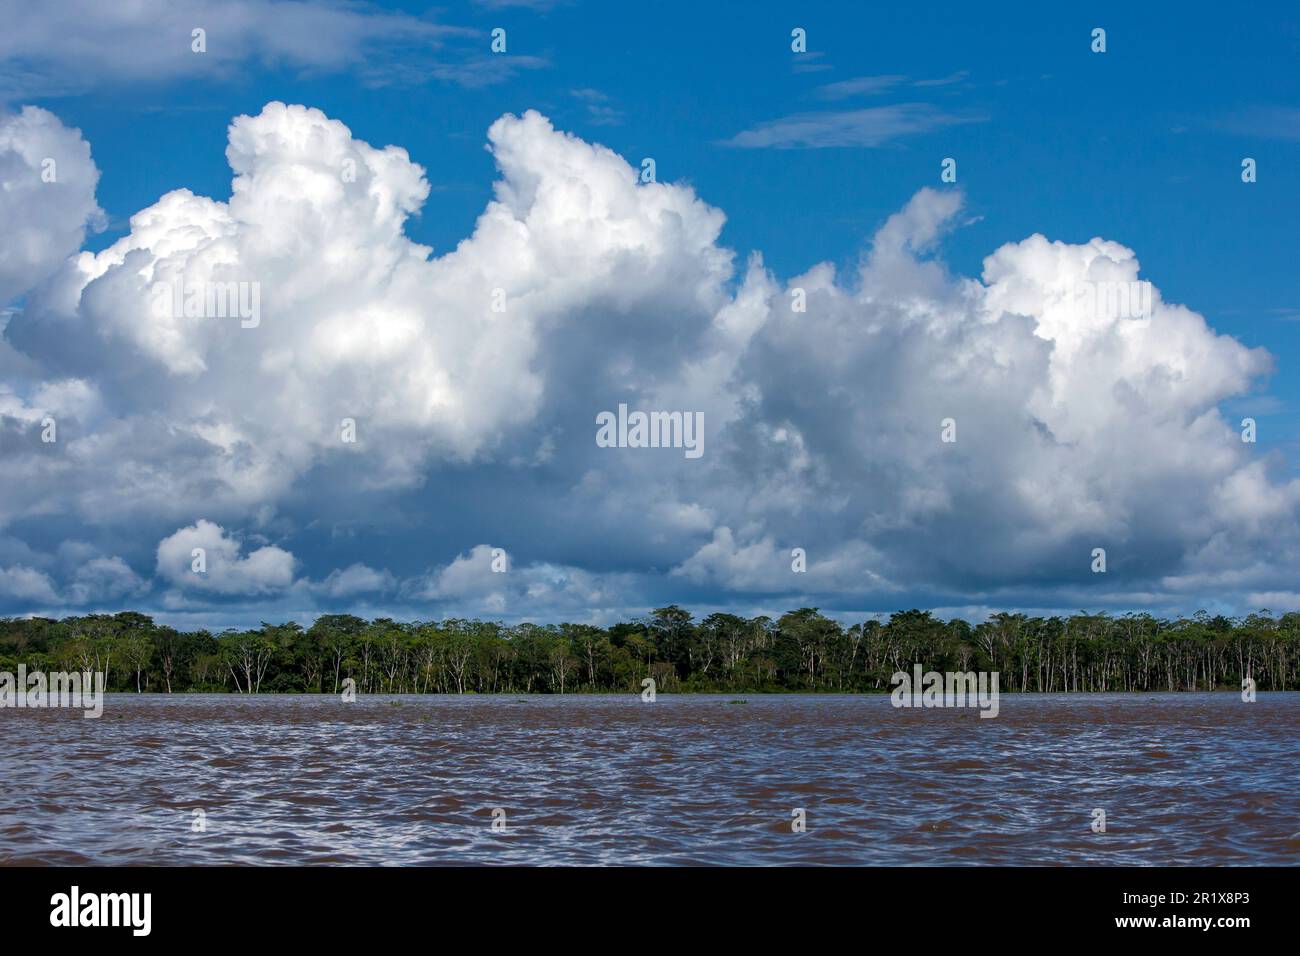 Clouds form over the Amazon River and adjacent forest near Iquitos in Peru. Stock Photo